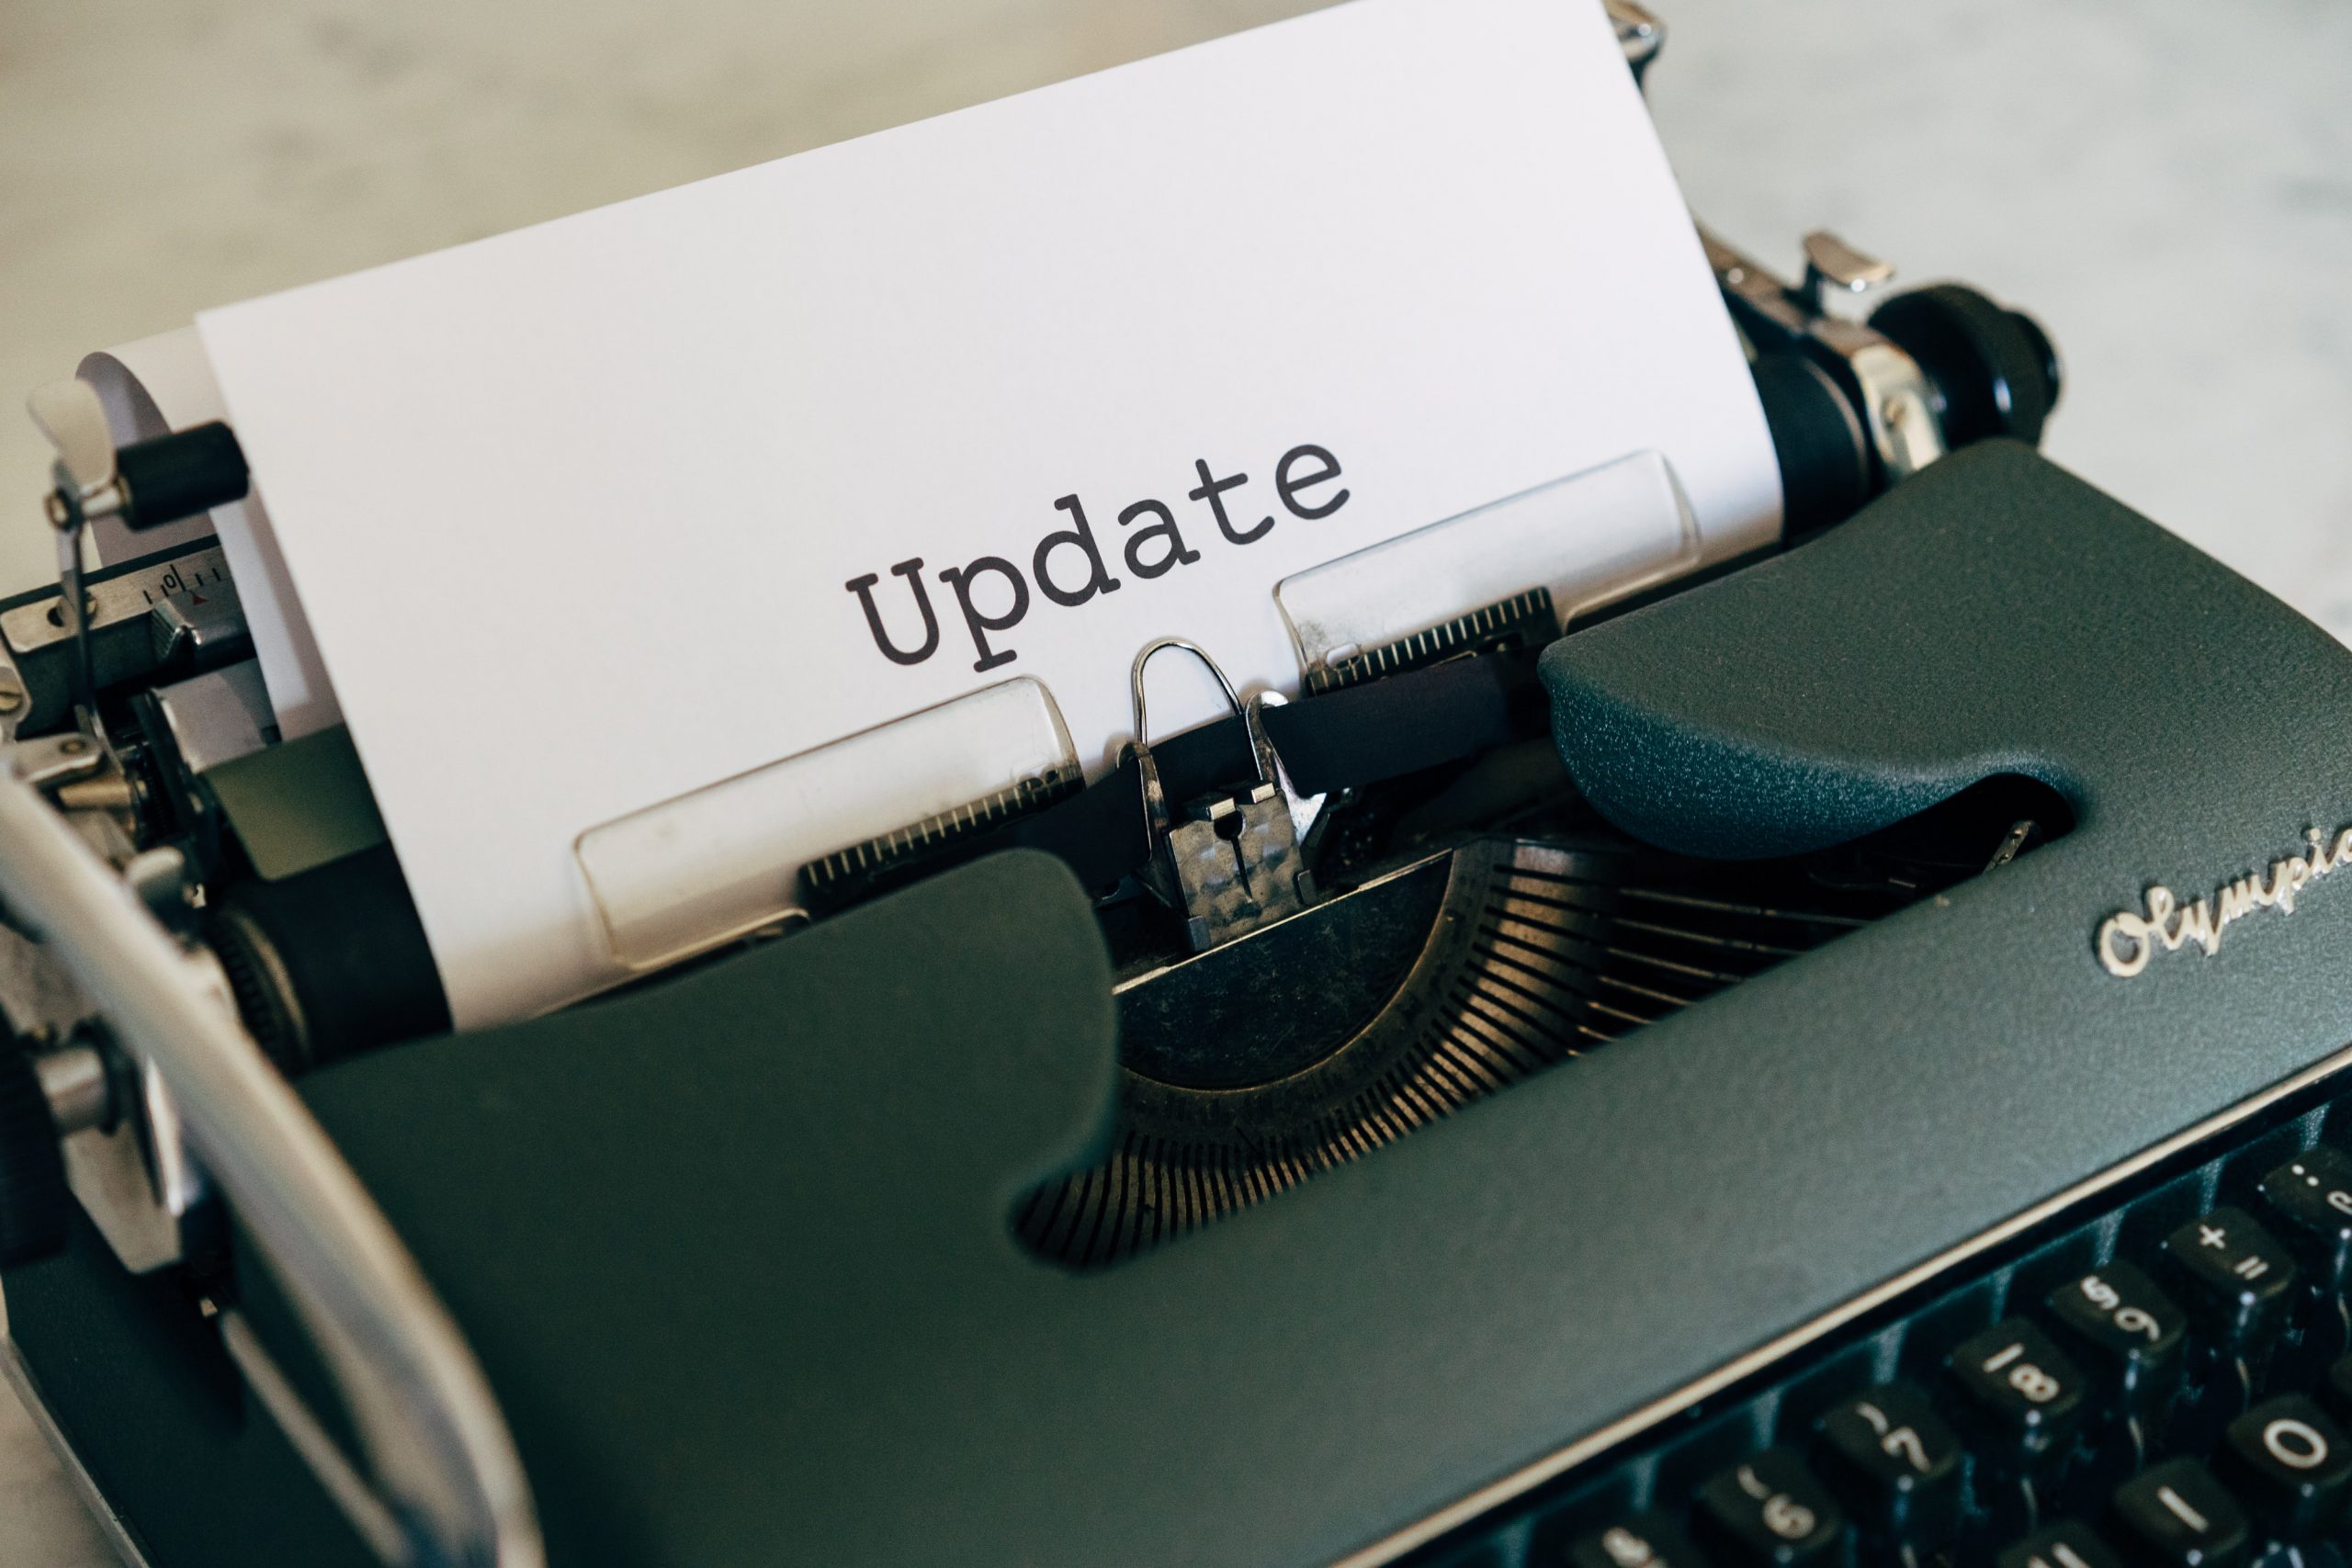 This Week in Immigration News: K-1 Fiancé Visa Ban Confusion, Update on USCIS Office Closures, USCIS Statement on June 22nd Presidential Proclamation, USCIS Statement on its Financial Position, Texas Service Center Moves to New Address